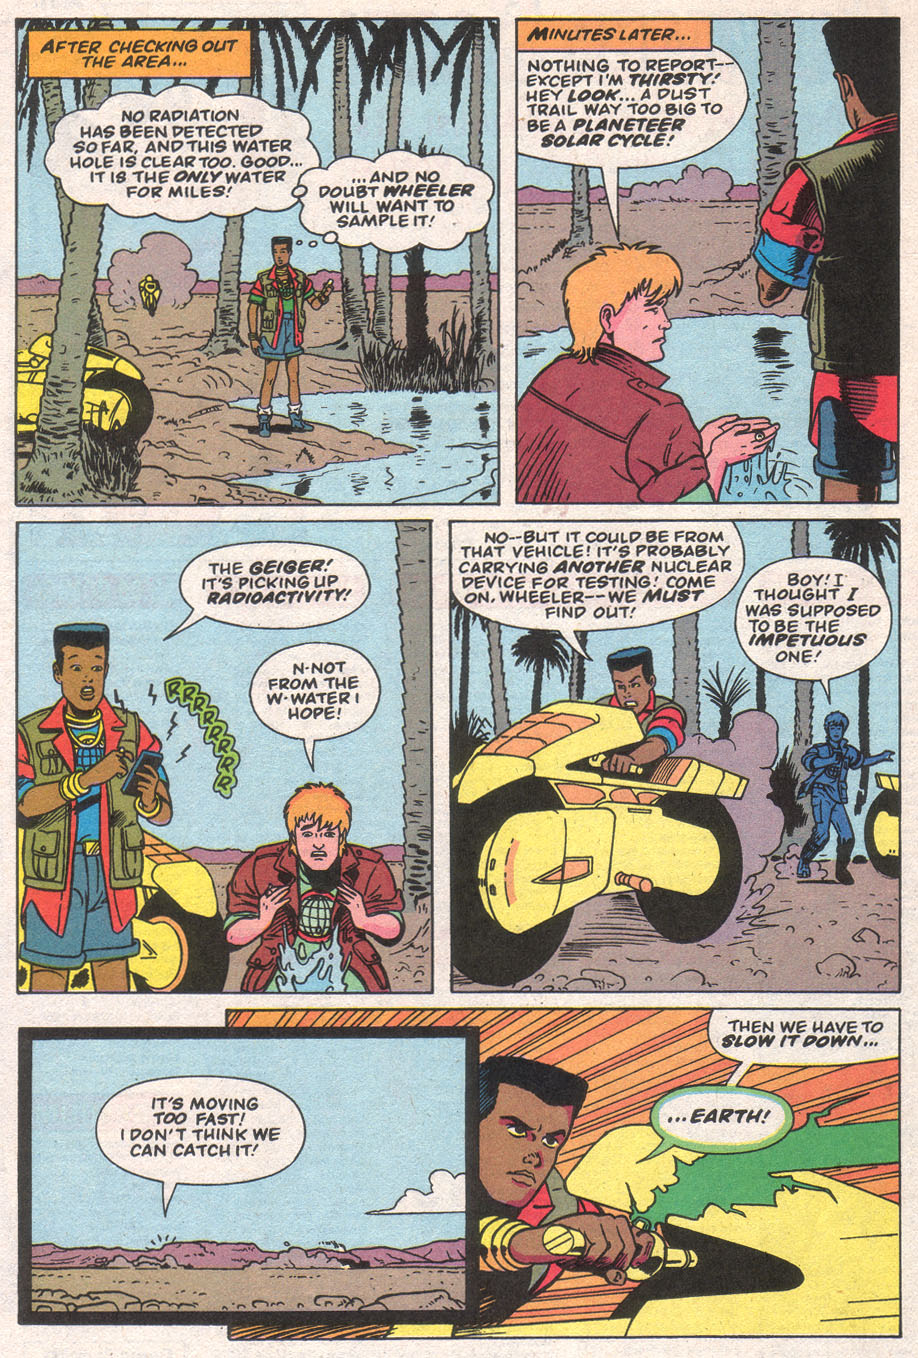 Captain Planet and the Planeteers 11 Page 24